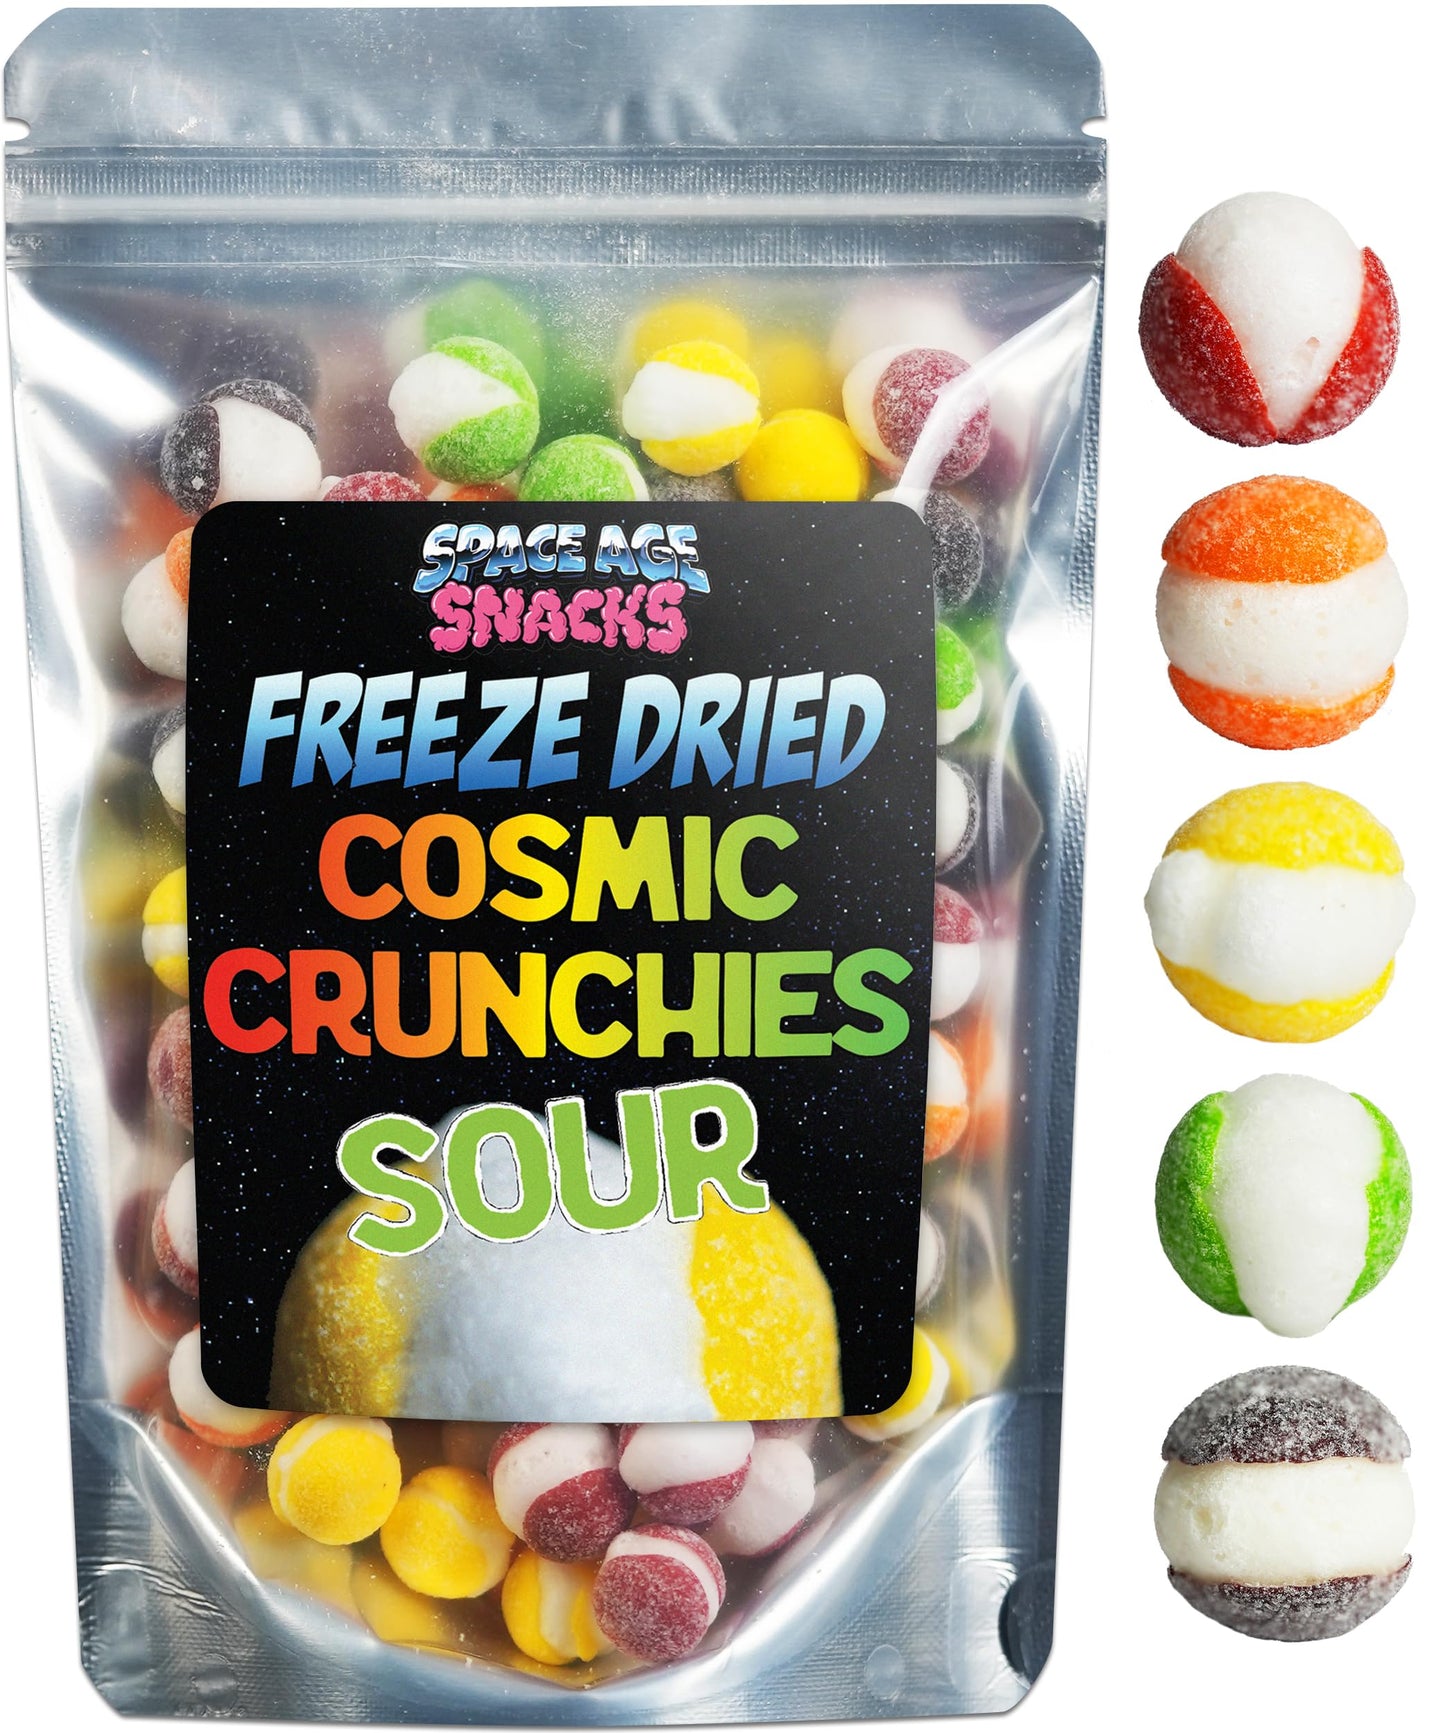 Premium Freeze Dried Sour Skittles - Cosmic Crunchies Dried Candy - Freetles Dry Candy for All Ages (4 Ounce)